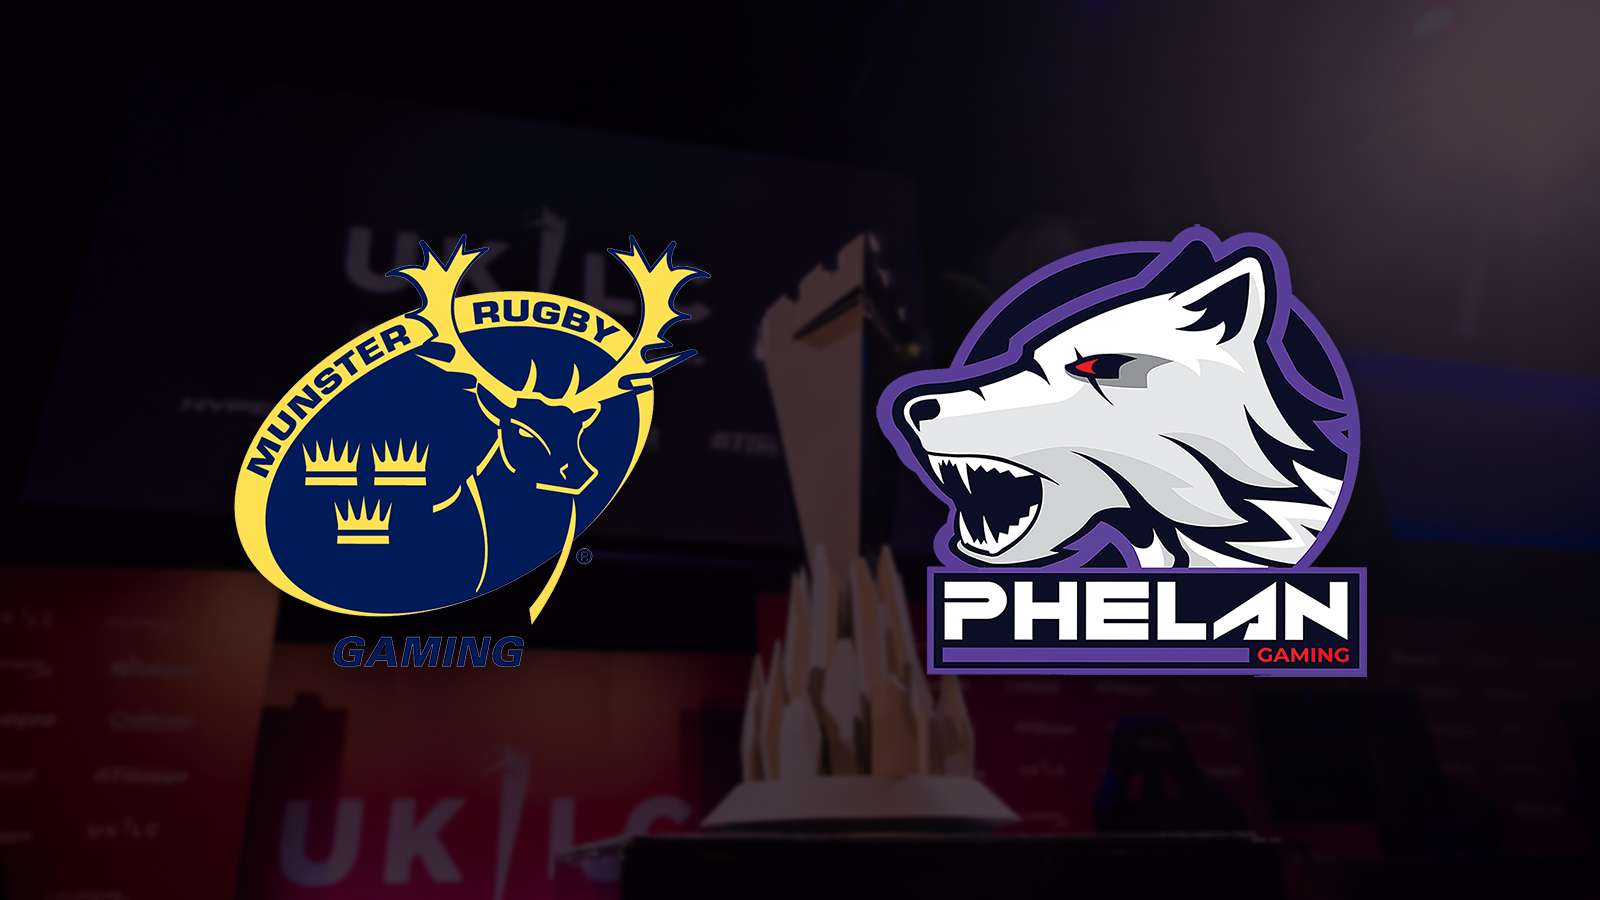 Munster Rugby Gaming ends deal with Phelan Gaming